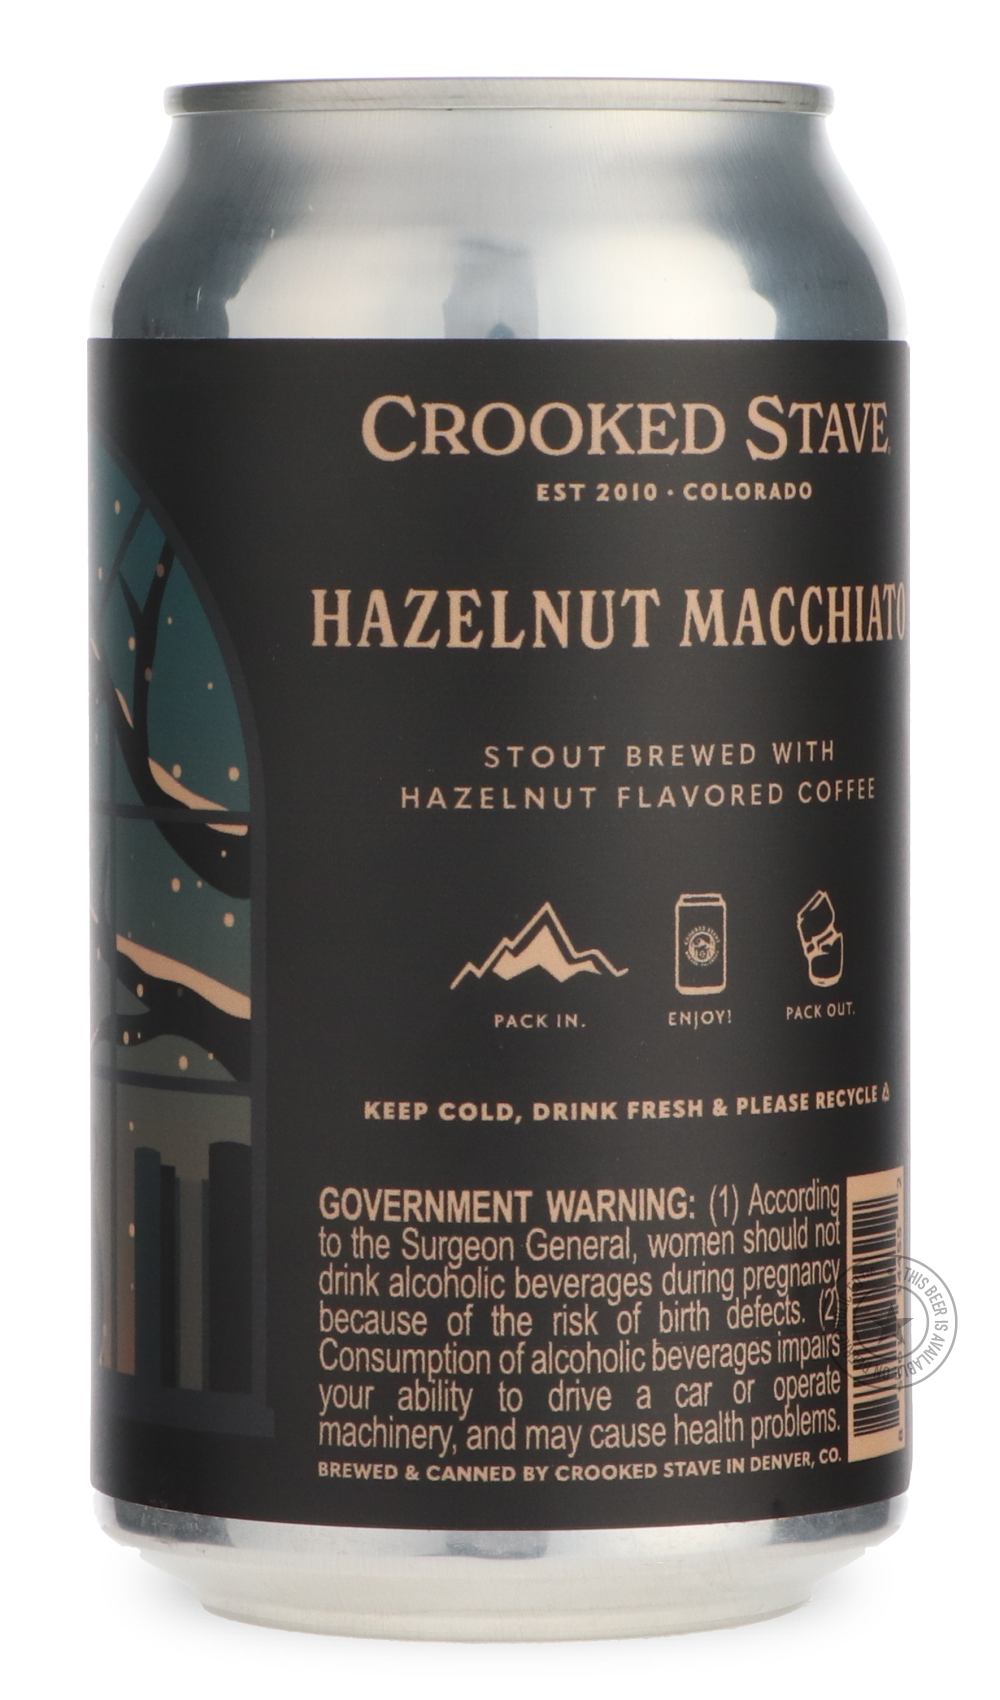 -Crooked Stave- Hazelnut Macchiato Stout-Stout & Porter- Only @ Beer Republic - The best online beer store for American & Canadian craft beer - Buy beer online from the USA and Canada - Bier online kopen - Amerikaans bier kopen - Craft beer store - Craft beer kopen - Amerikanisch bier kaufen - Bier online kaufen - Acheter biere online - IPA - Stout - Porter - New England IPA - Hazy IPA - Imperial Stout - Barrel Aged - Barrel Aged Imperial Stout - Brown - Dark beer - Blond - Blonde - Pilsner - Lager - Wheat 